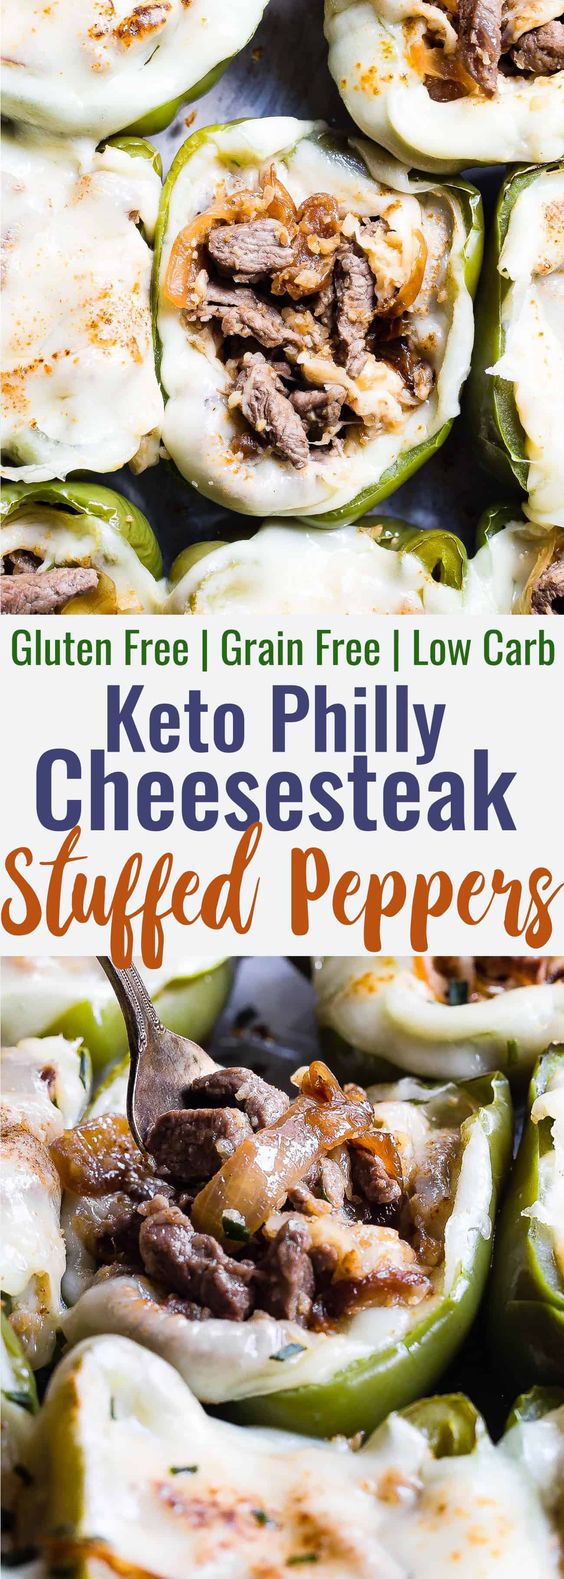 LOW CARB PHILLY CHEESE STEAK STUFFED PEPPERS WITH CAULIFLOWER RECIPES